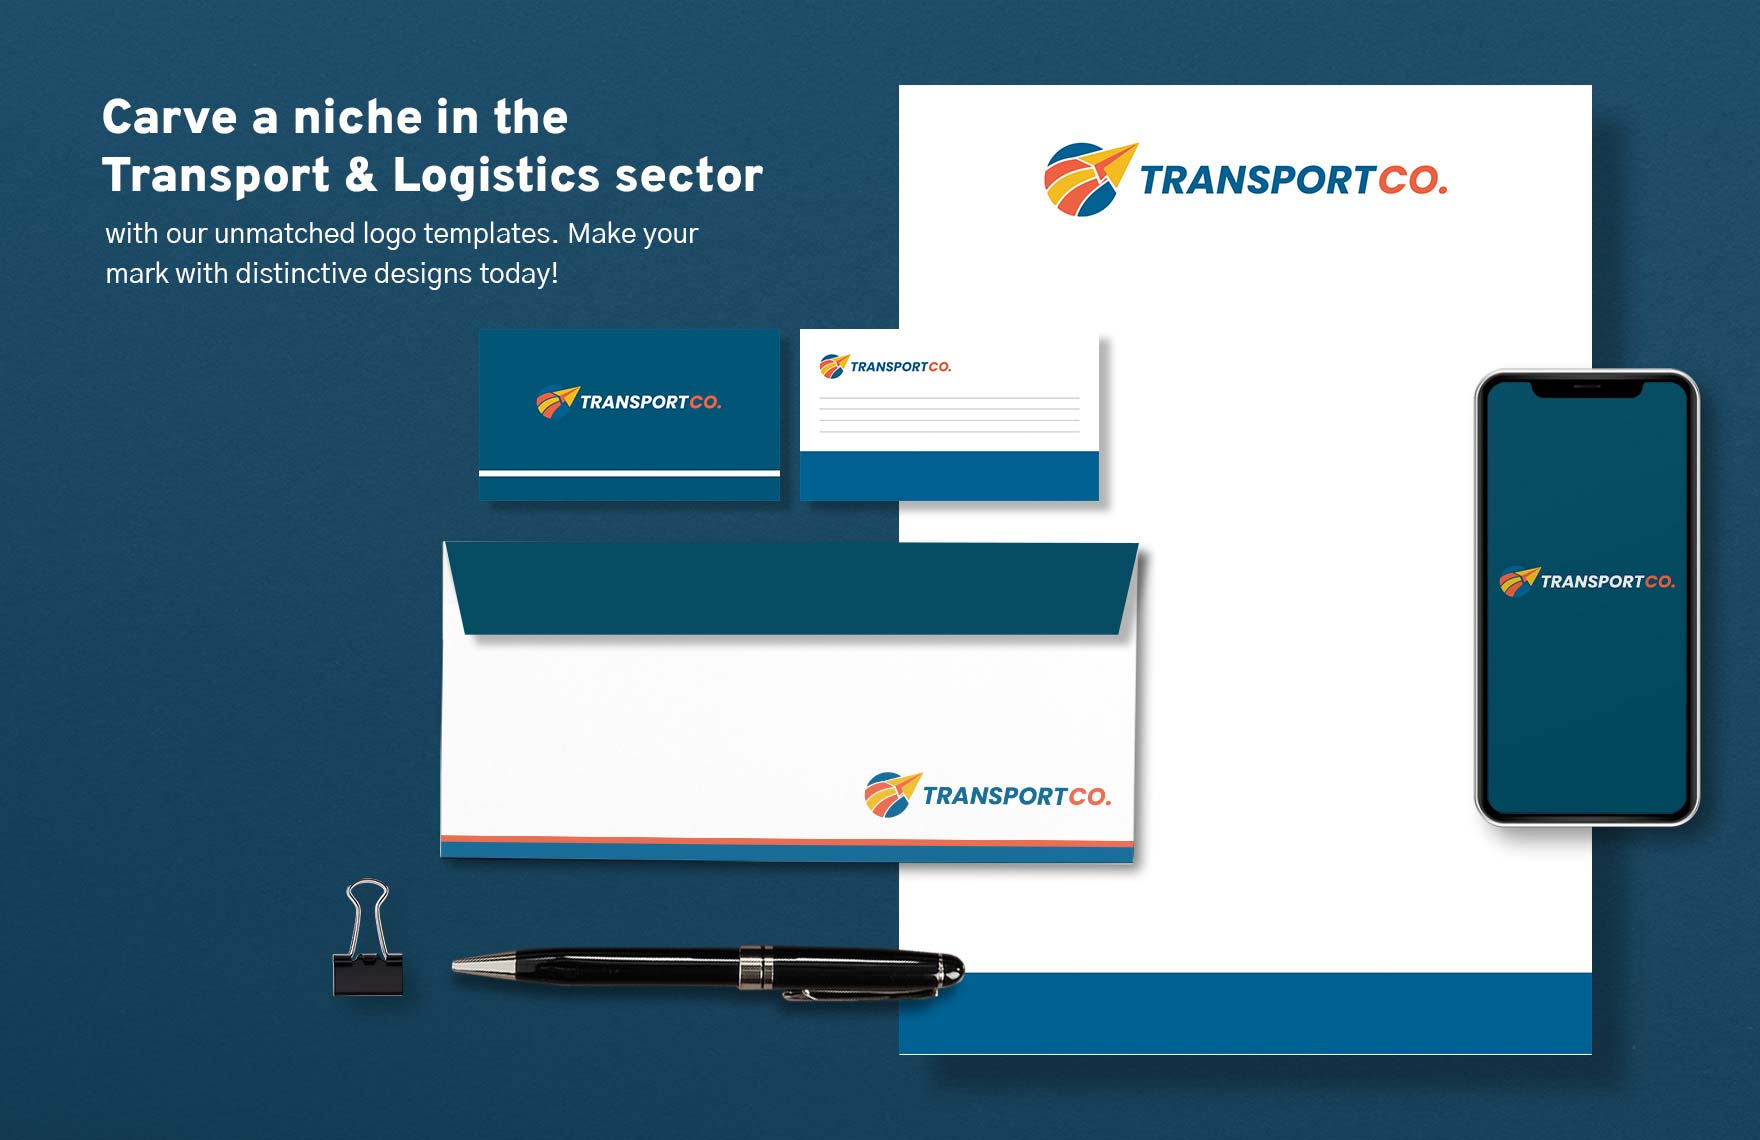 Transport and Logistics Supply Chain Management Logo Template